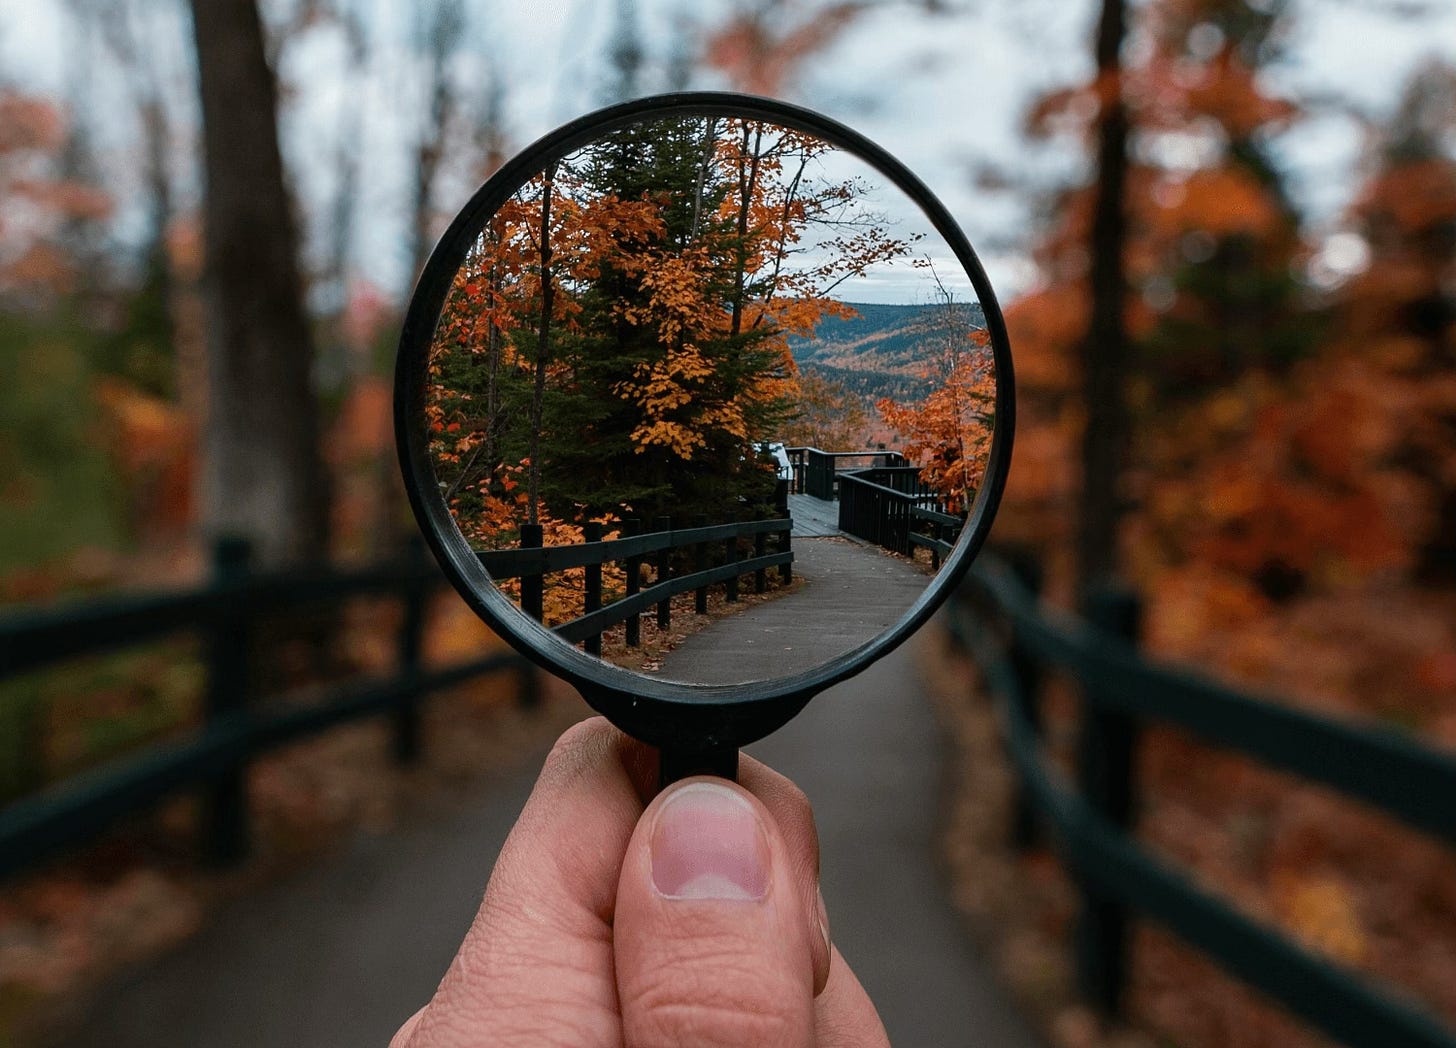 Magnifying glass bringing outdoor path into focus